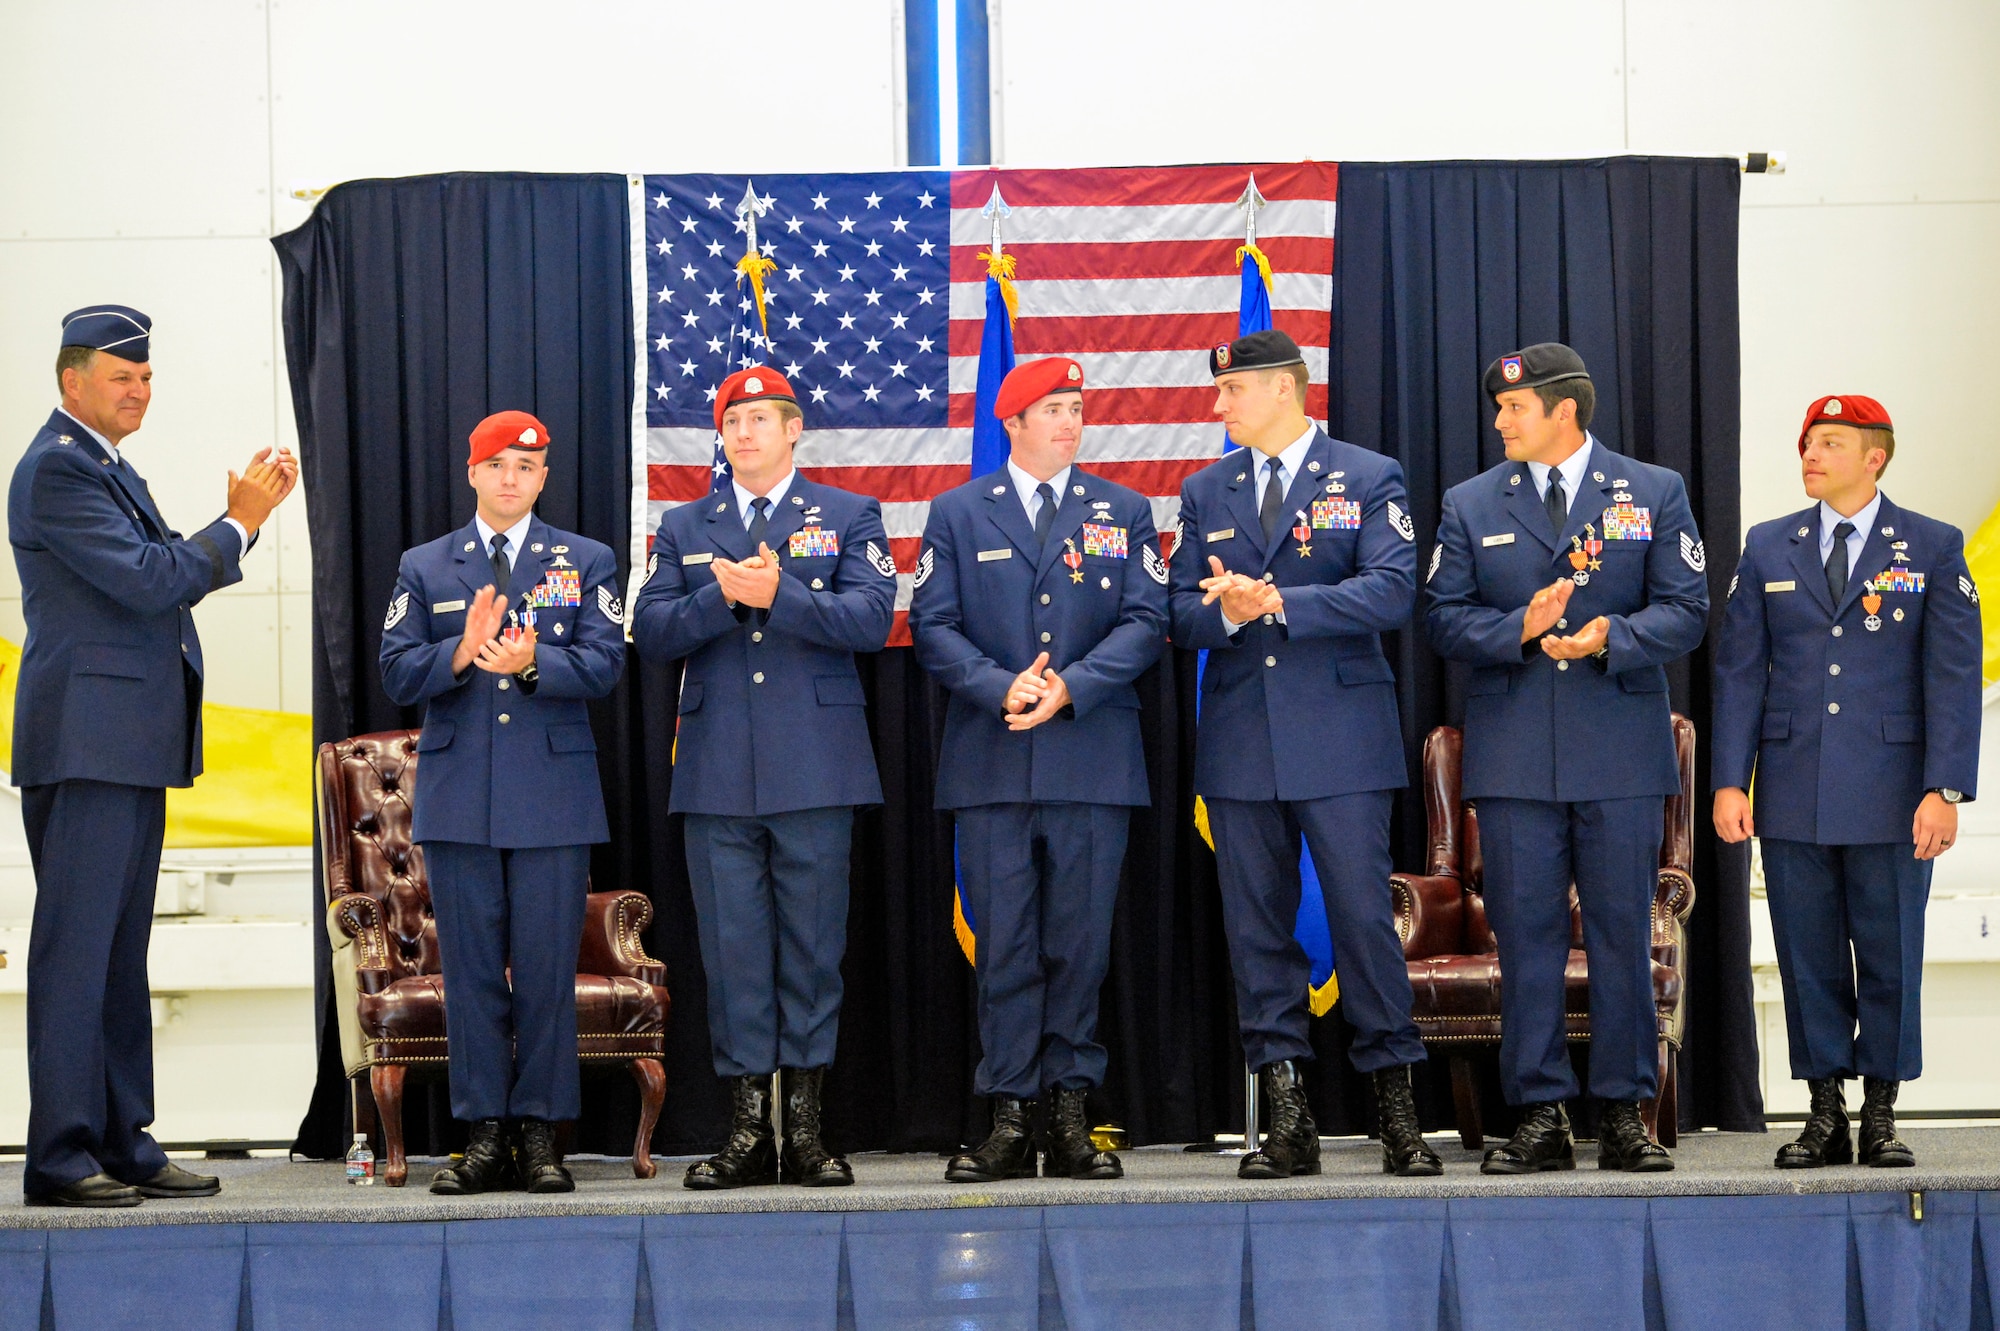 Lt. Gen. Bradley Heithold (left) applauds six Airmen from the 22nd Special Tactics Squadron Aug. 18, 2014, after awarding them with medals for valor during the 22nd STS awards ceremony at Joint Base Lewis-McChord, Wash. Heithold pinned eight medals on to the Airmen which included a Silver Star, a Bronze Star with Valor and four Bronze Stars. Heithold is the  the Air Force Special Operations Command commander. (U.S. Air Force photo/Staff Sgt. Russ Jackson)